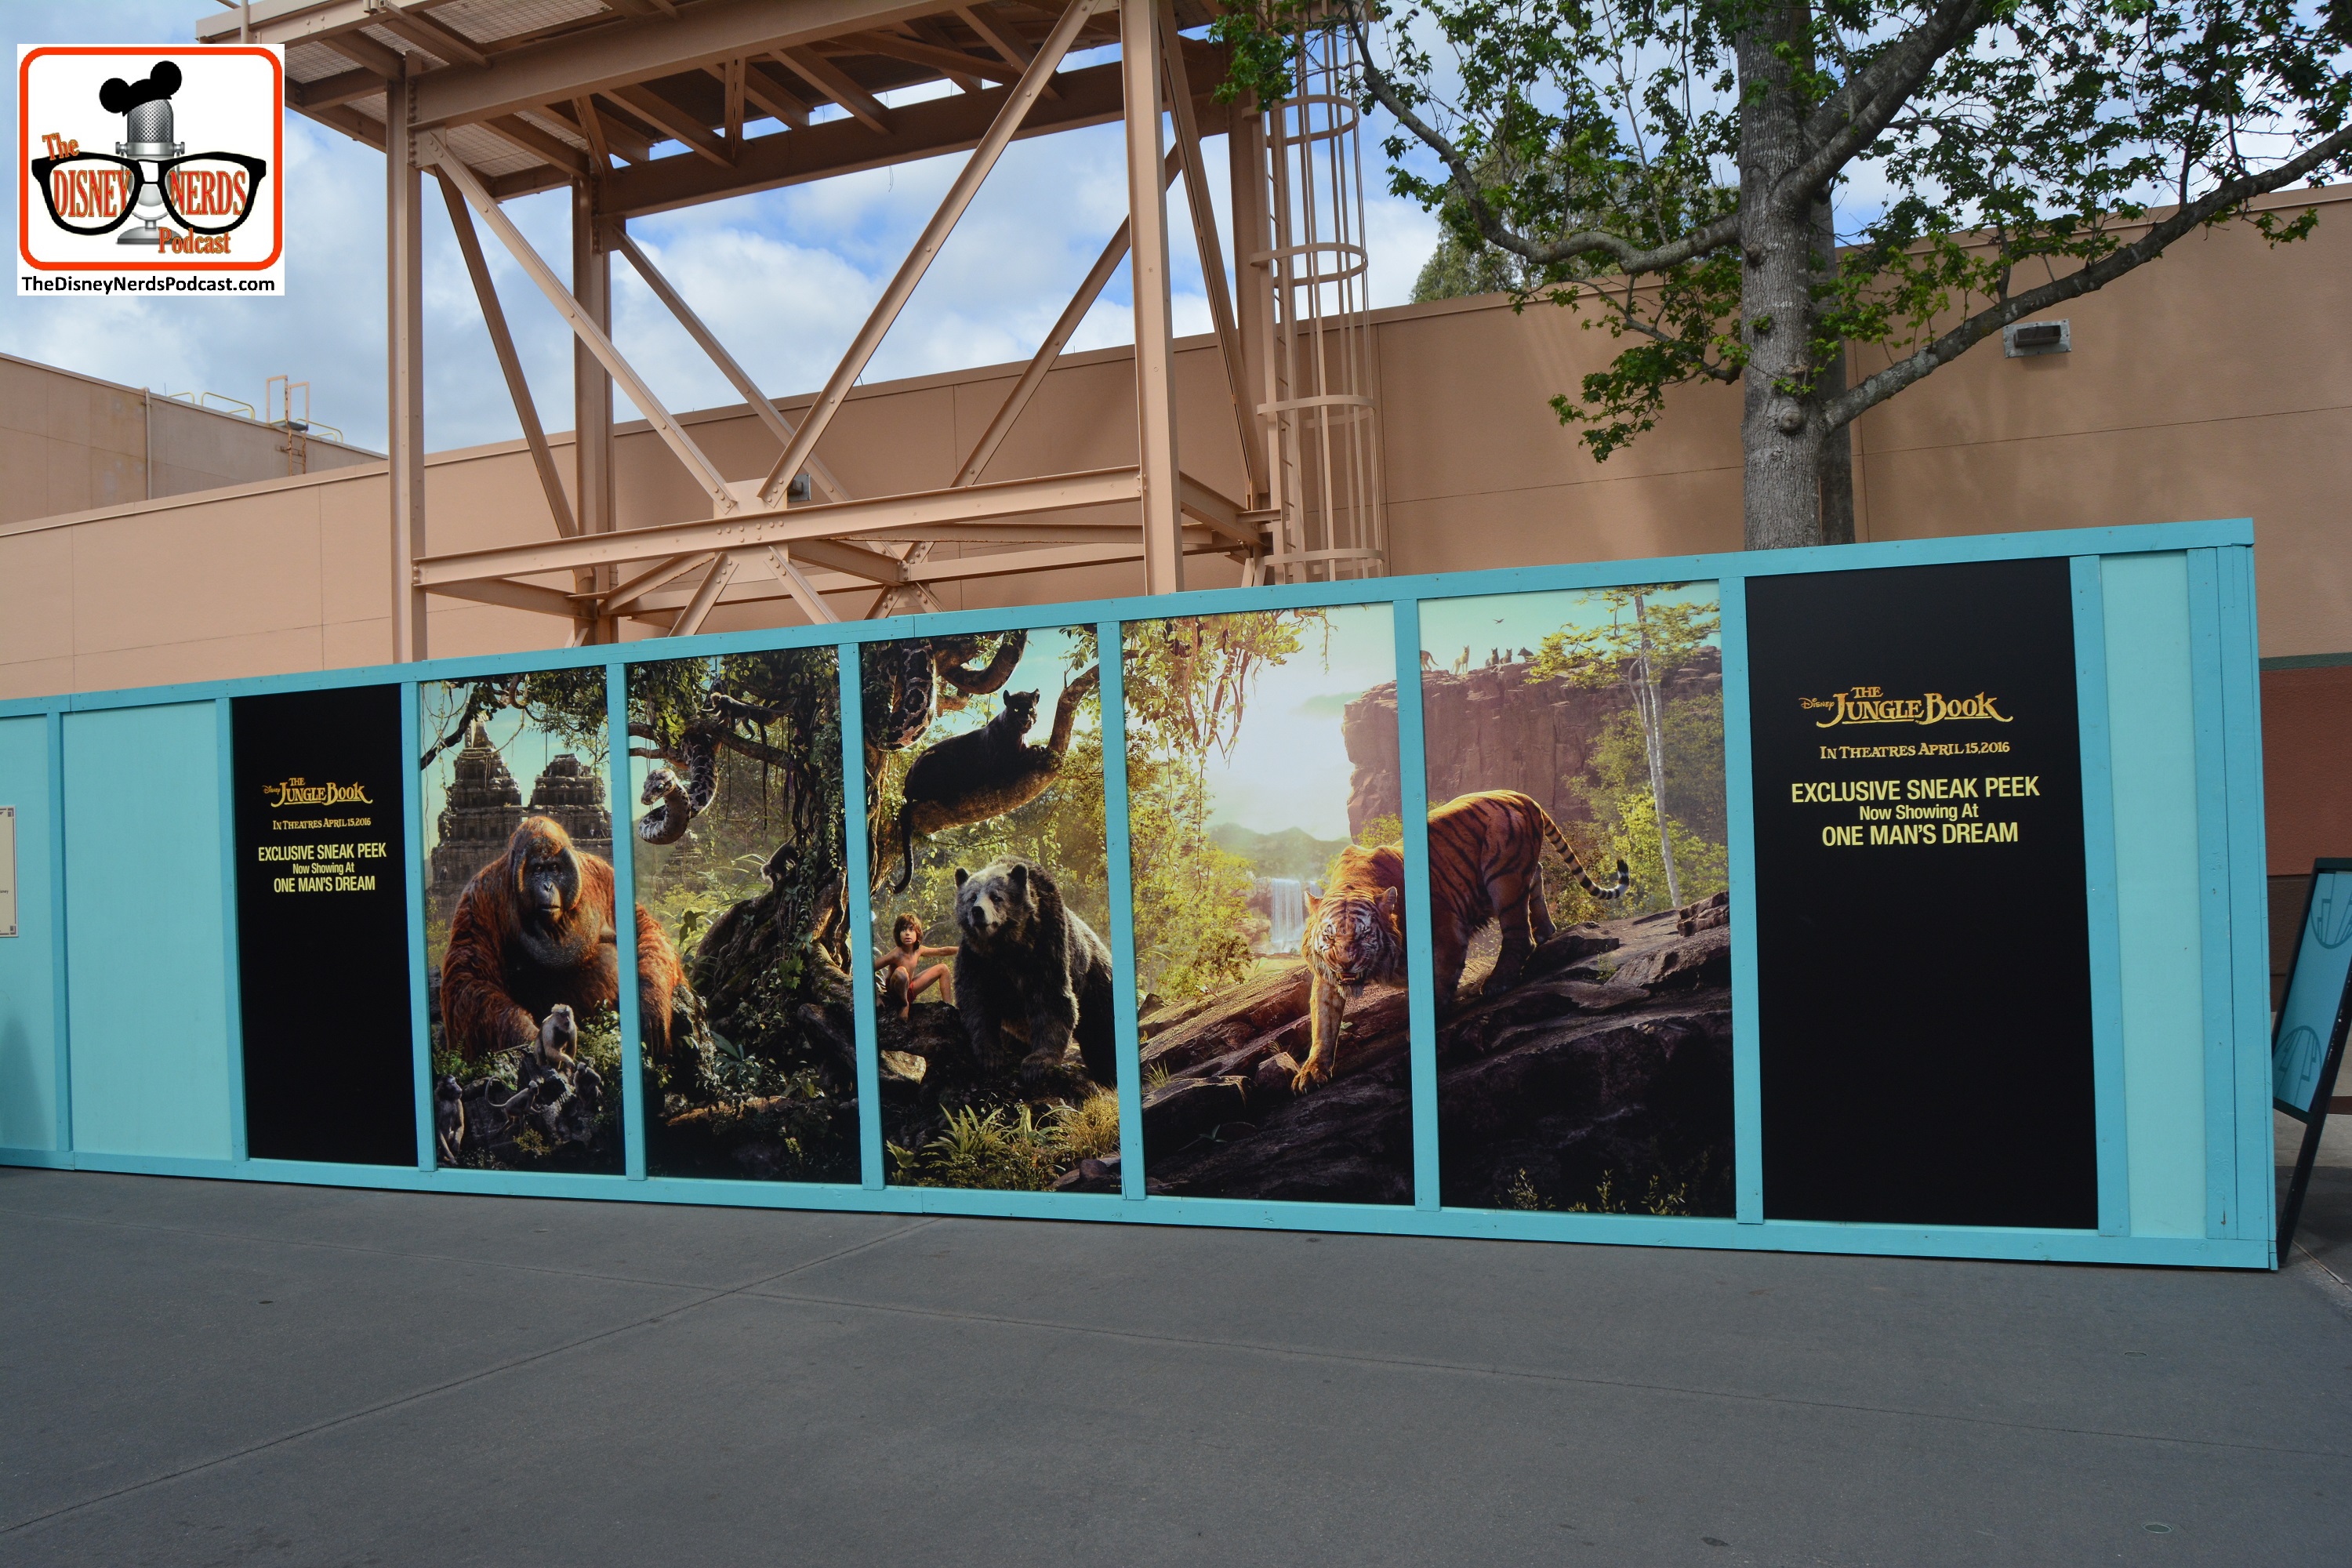 DNP April 2016 Photo Report: Hollywood Studios: Walls near One Mans Dream - Attraction is still open with a jungle book ending.